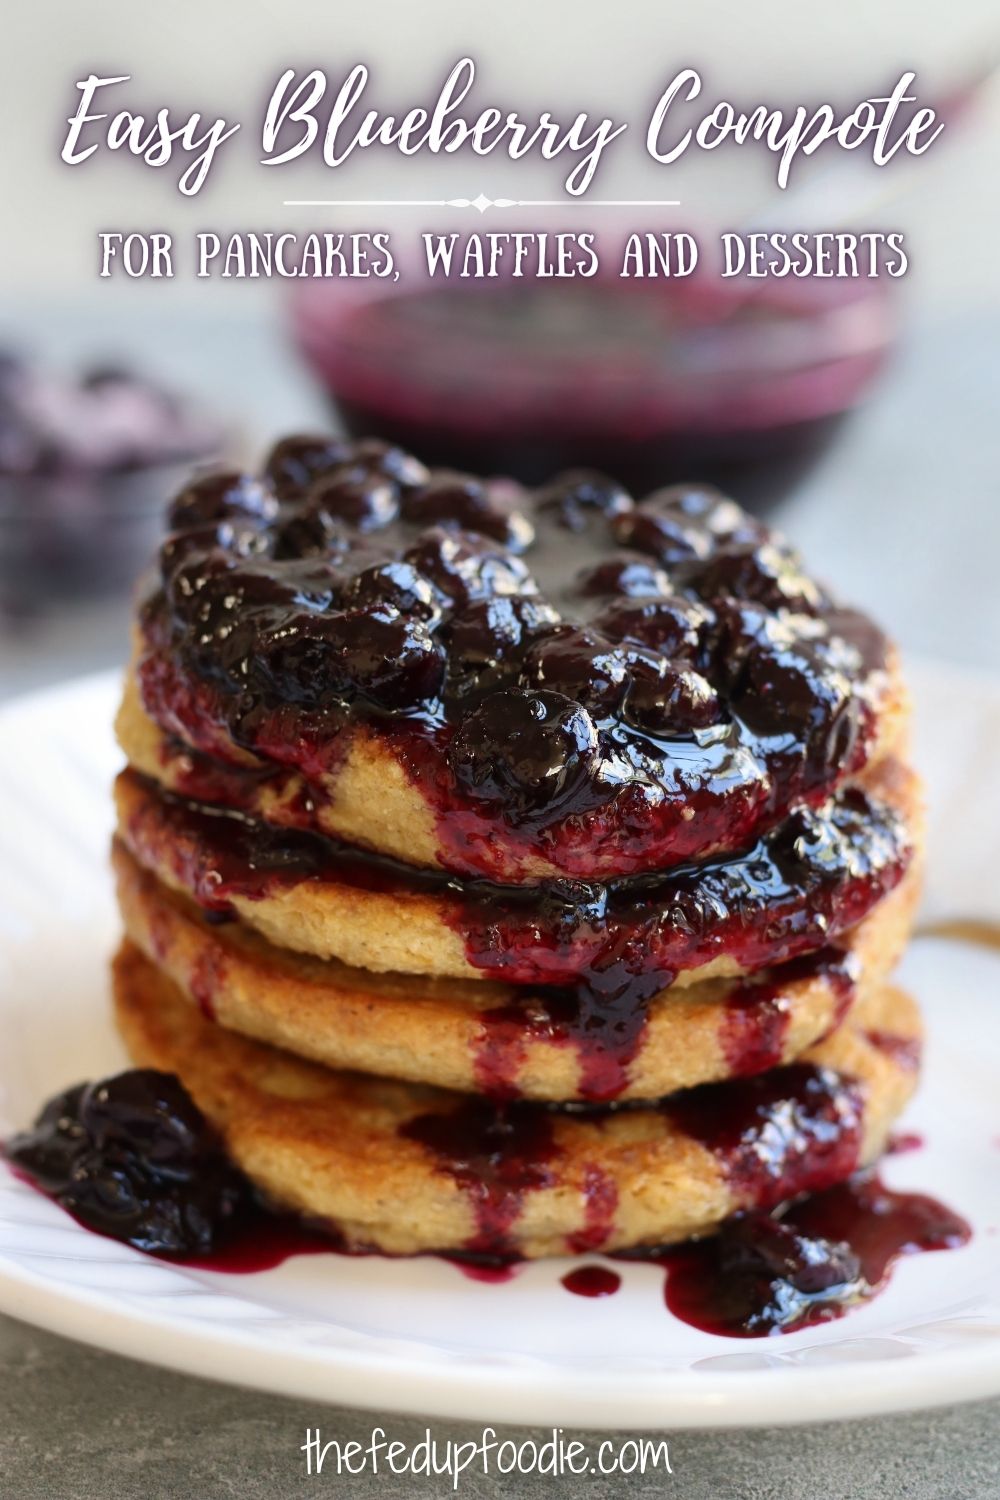 This Blueberry Compote recipe is an incredibly easy blueberry sauce that tastes amazing on pancakes, cheesecake, cake, yogurt, pie , ice cream and scones. 
#BlueberryRecipes #BlueberryCompoteRecipe #BlueberryCompoteEasy #BlueberryCompoteForPancakes #BlueberrySauceEasy #BlueberrySauce